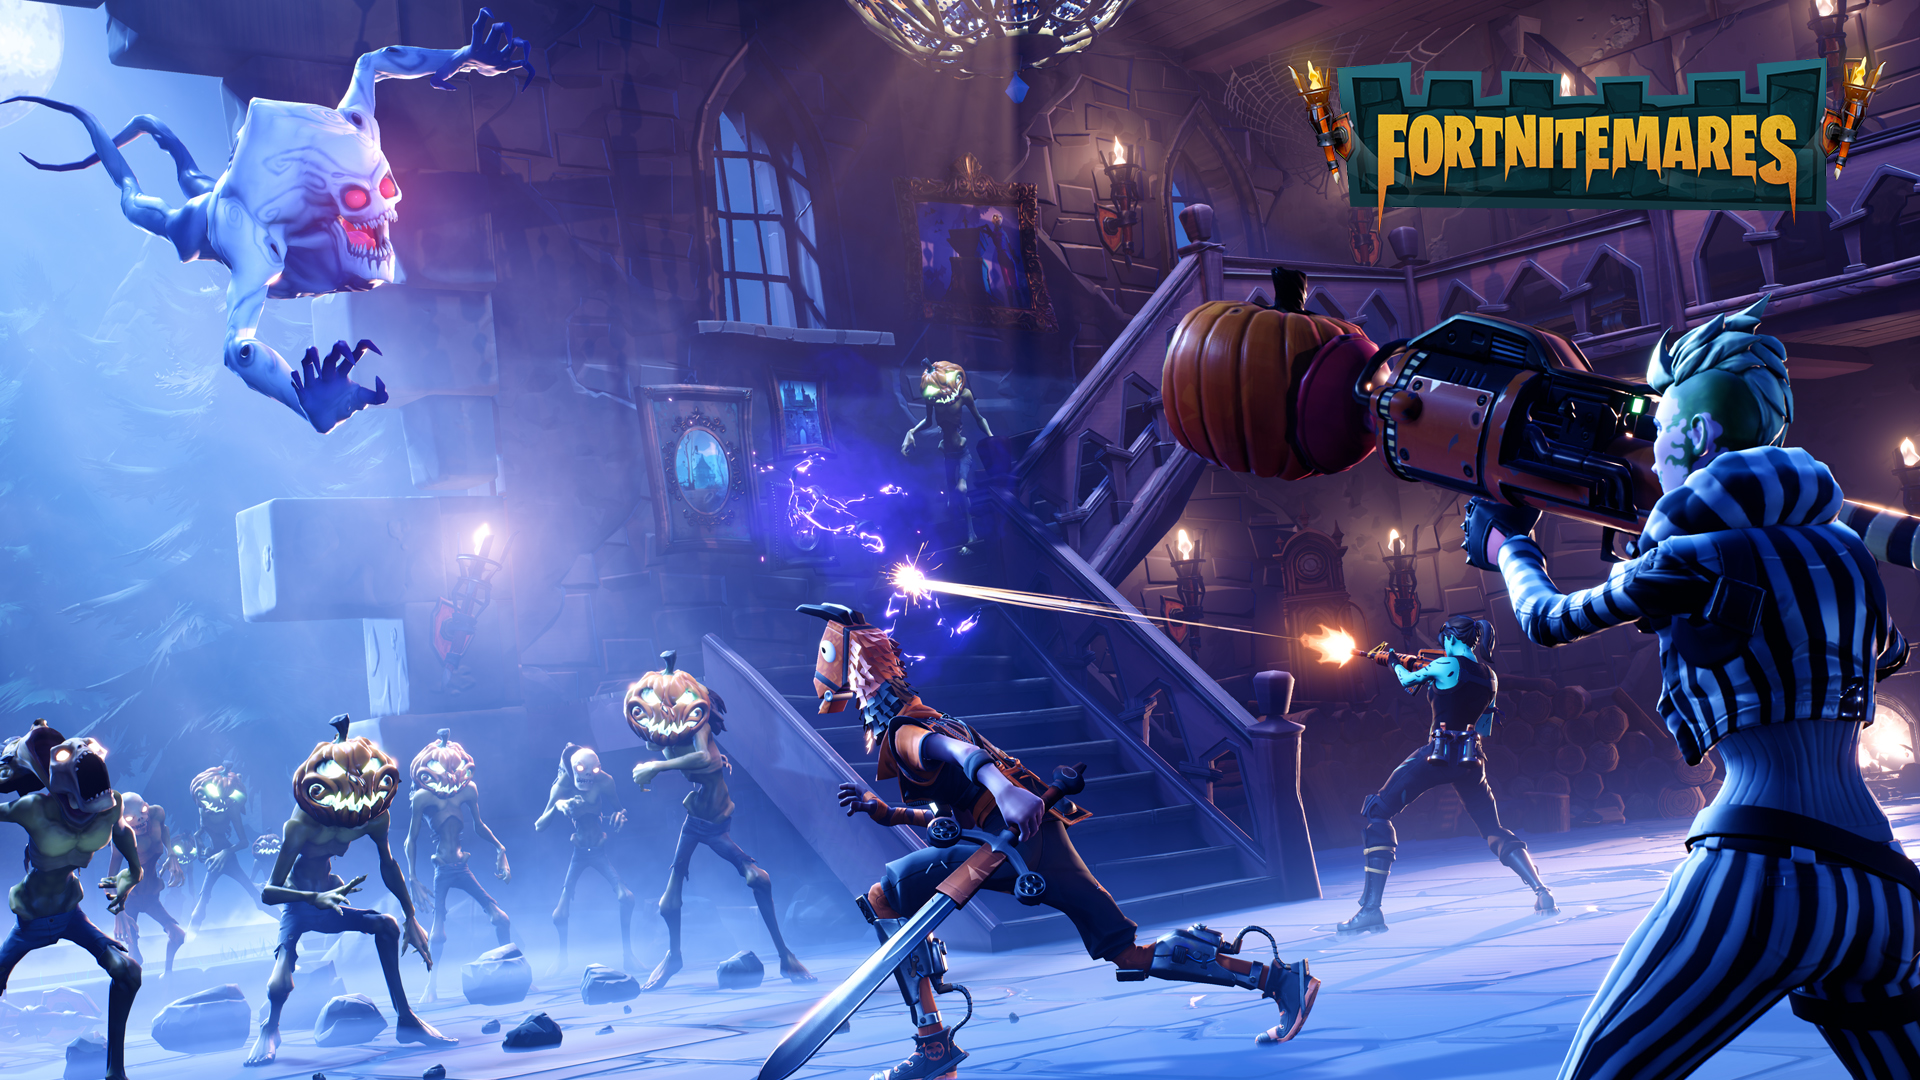 Tomorrow Marks The Start Of Fortnitemares 2019, Time For A Spooky Event In The World Of Fortnite